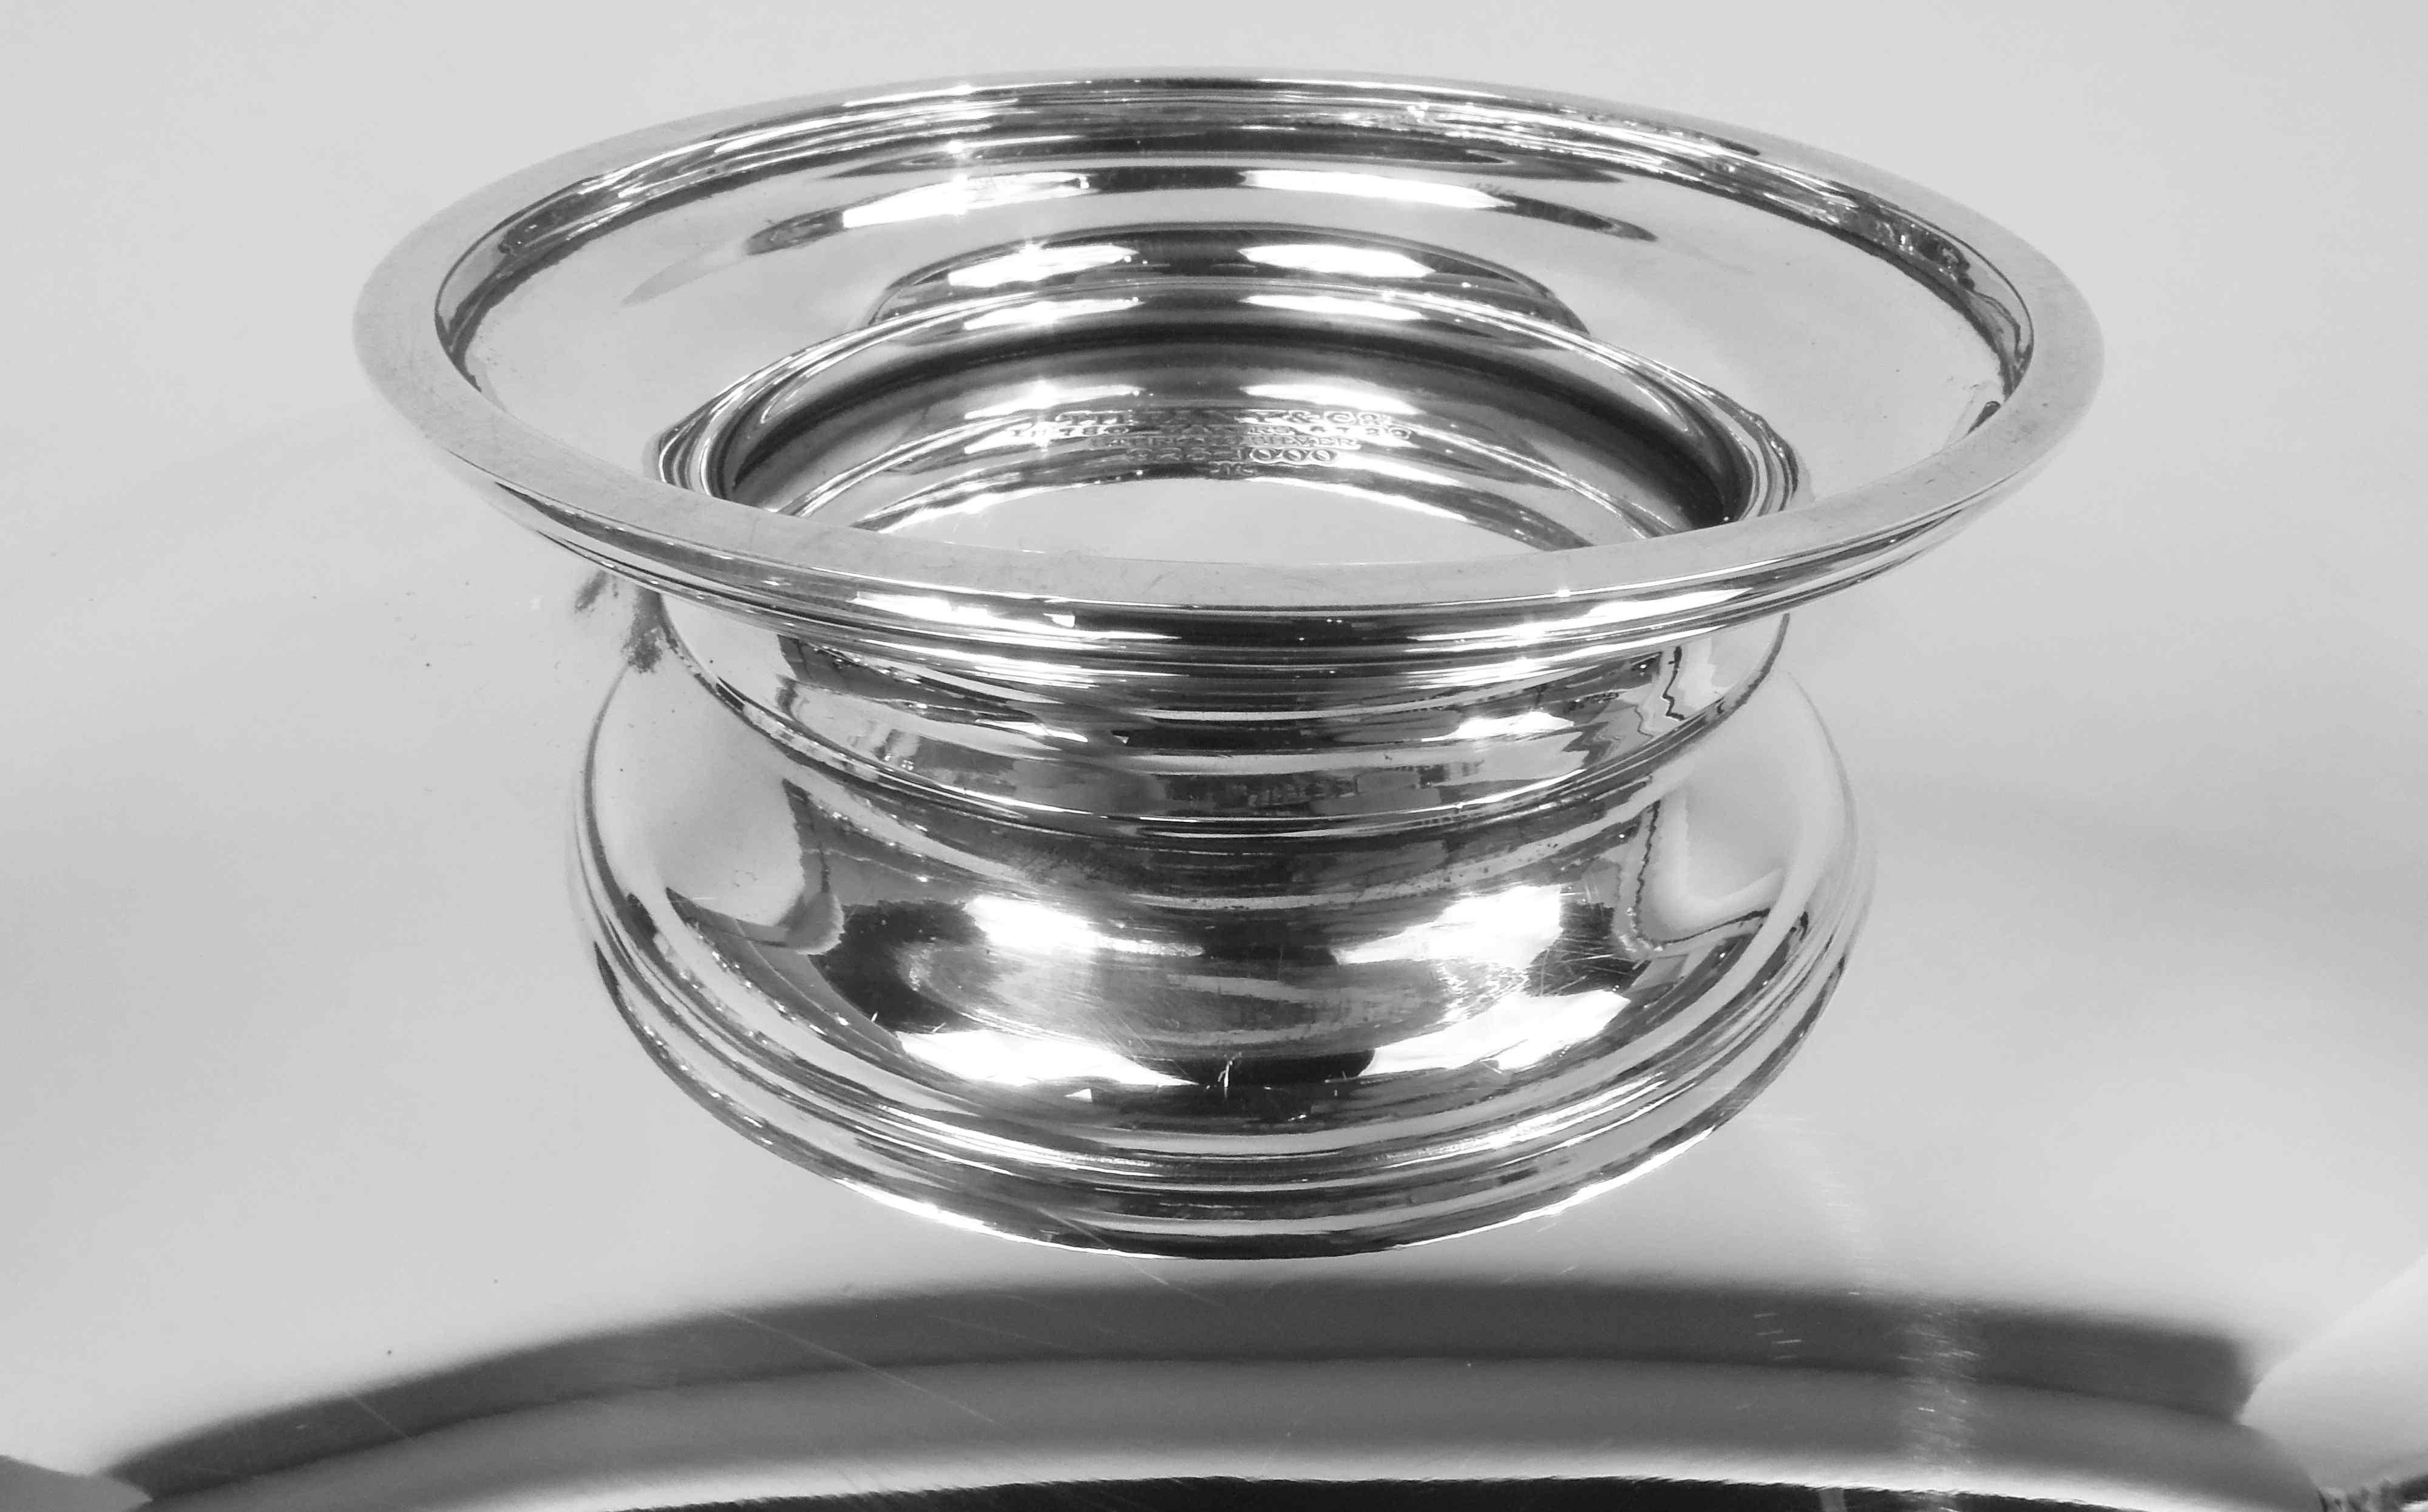 20th Century Tiffany American Art Deco Sterling Silver Footed Bowl C 1914 For Sale